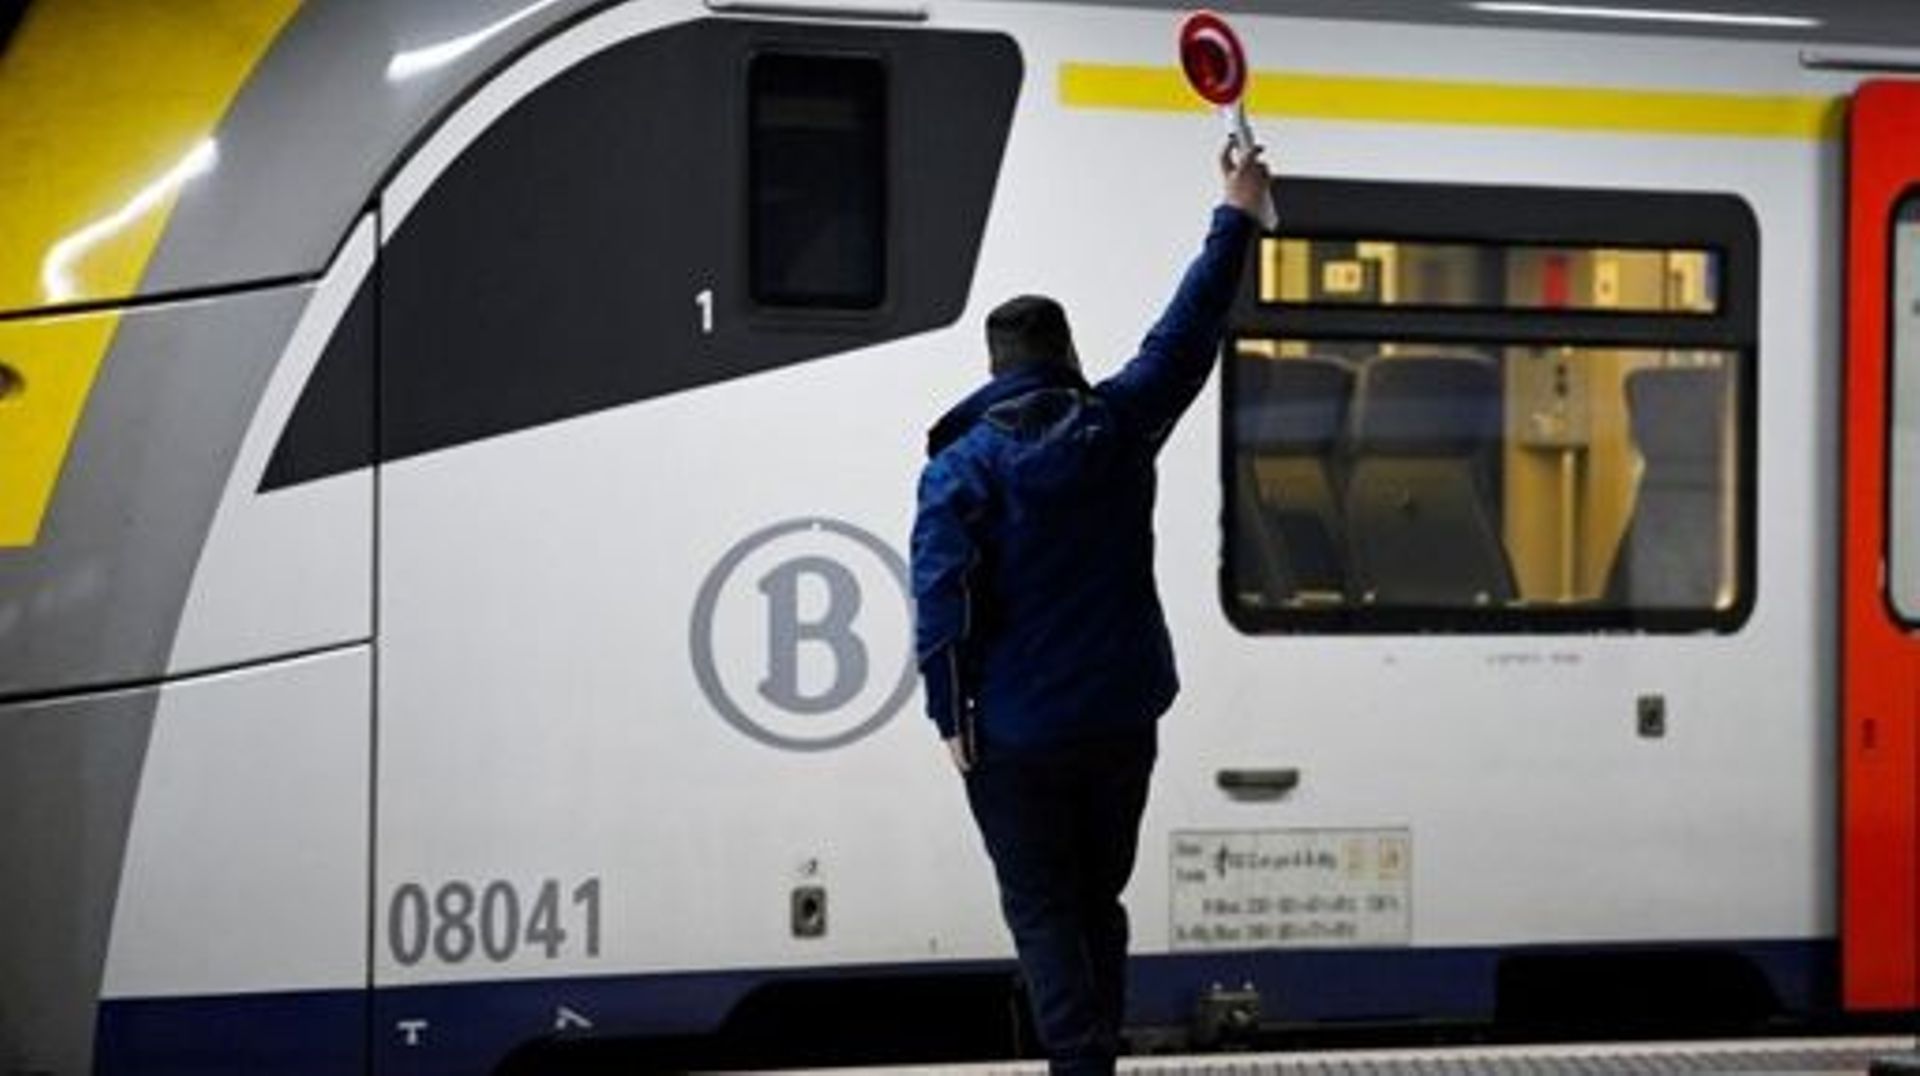 Station master sends a signal near the National Railway Company of Belgium (SNCB) train at Brussels-Schuman railway station on November 8, 2022.  John THYS / AFP